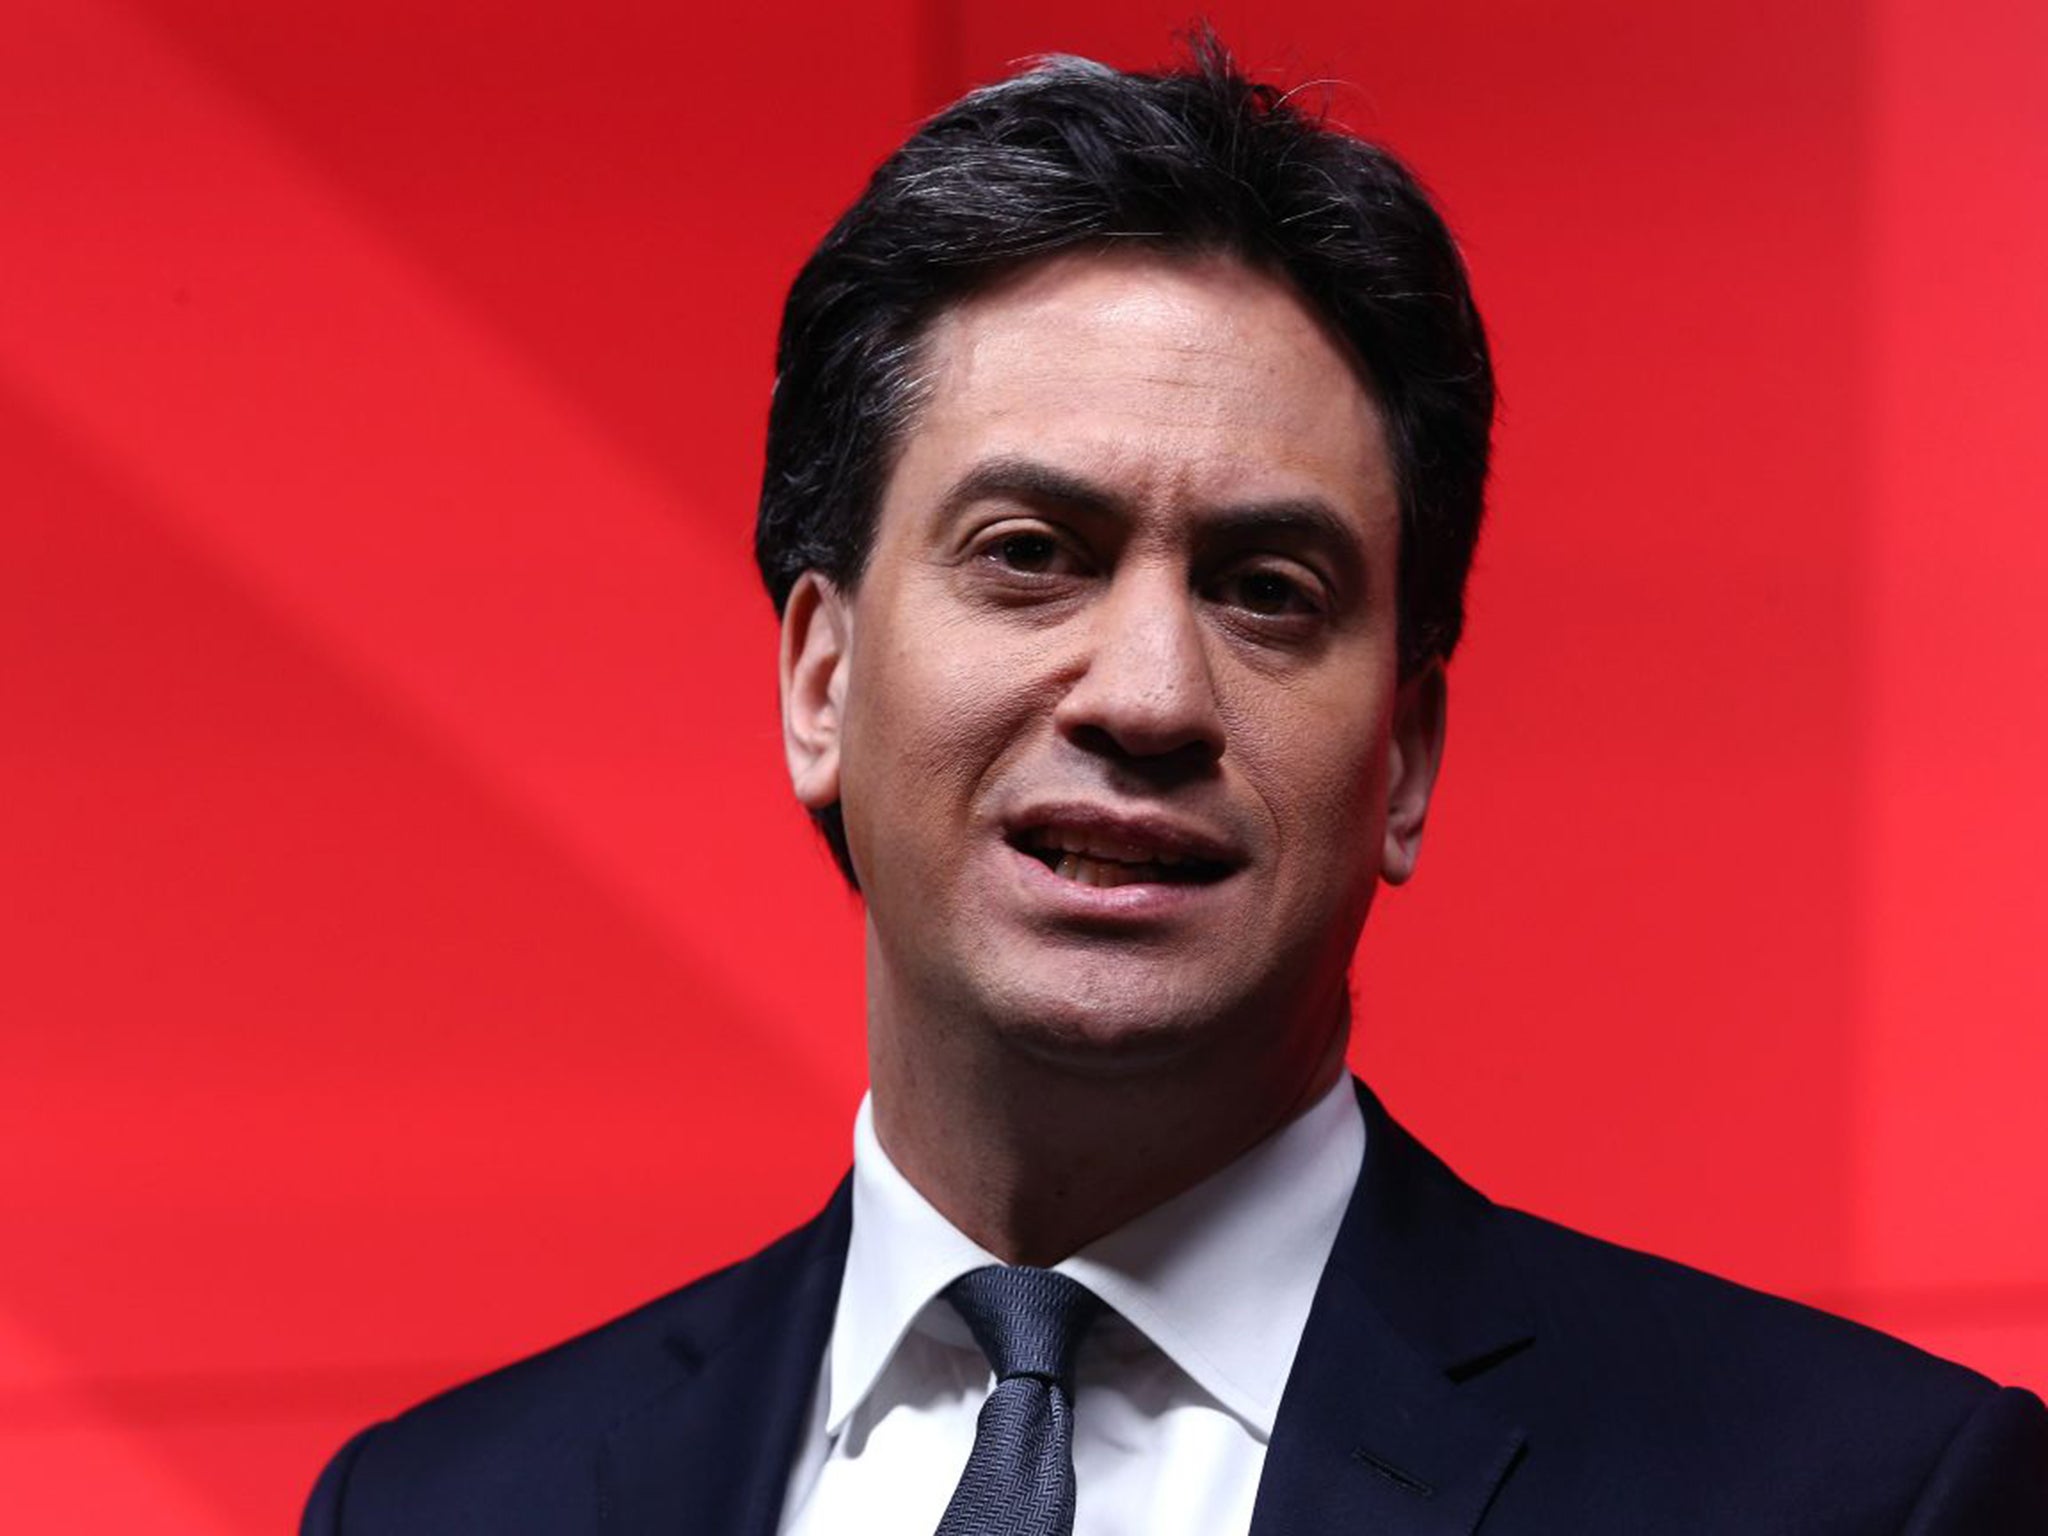 Ed Miliband has pledged to end zero-hours contracts (Getty)